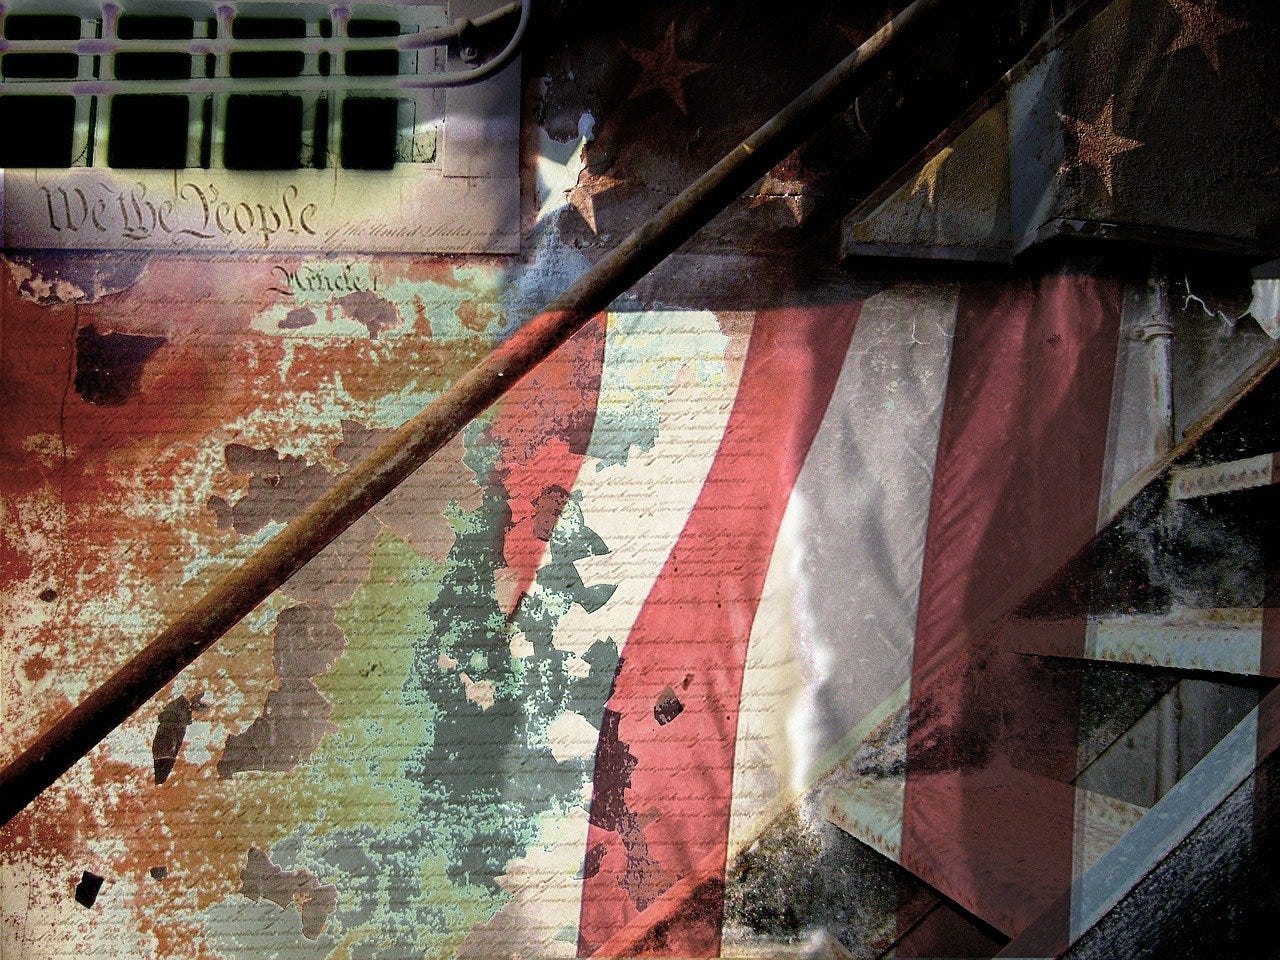 Tattered American flag against backdrop of Constitution with image stains. Image by cgrape from Pixabay